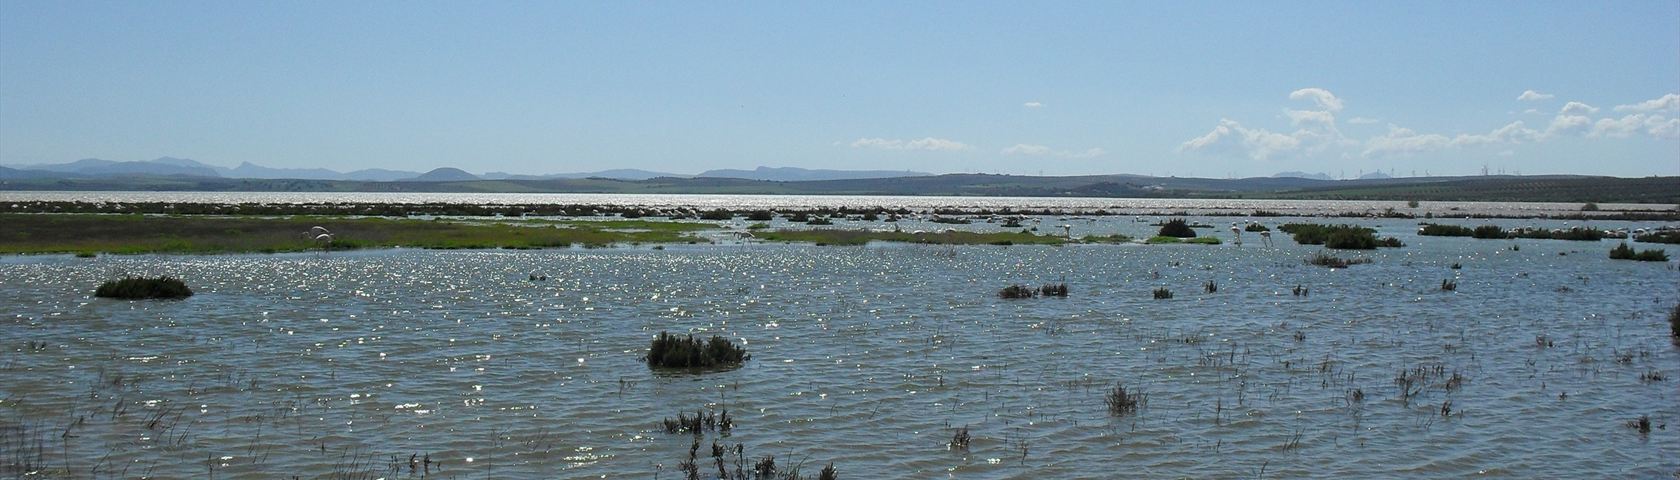 Flamingos in the Distance